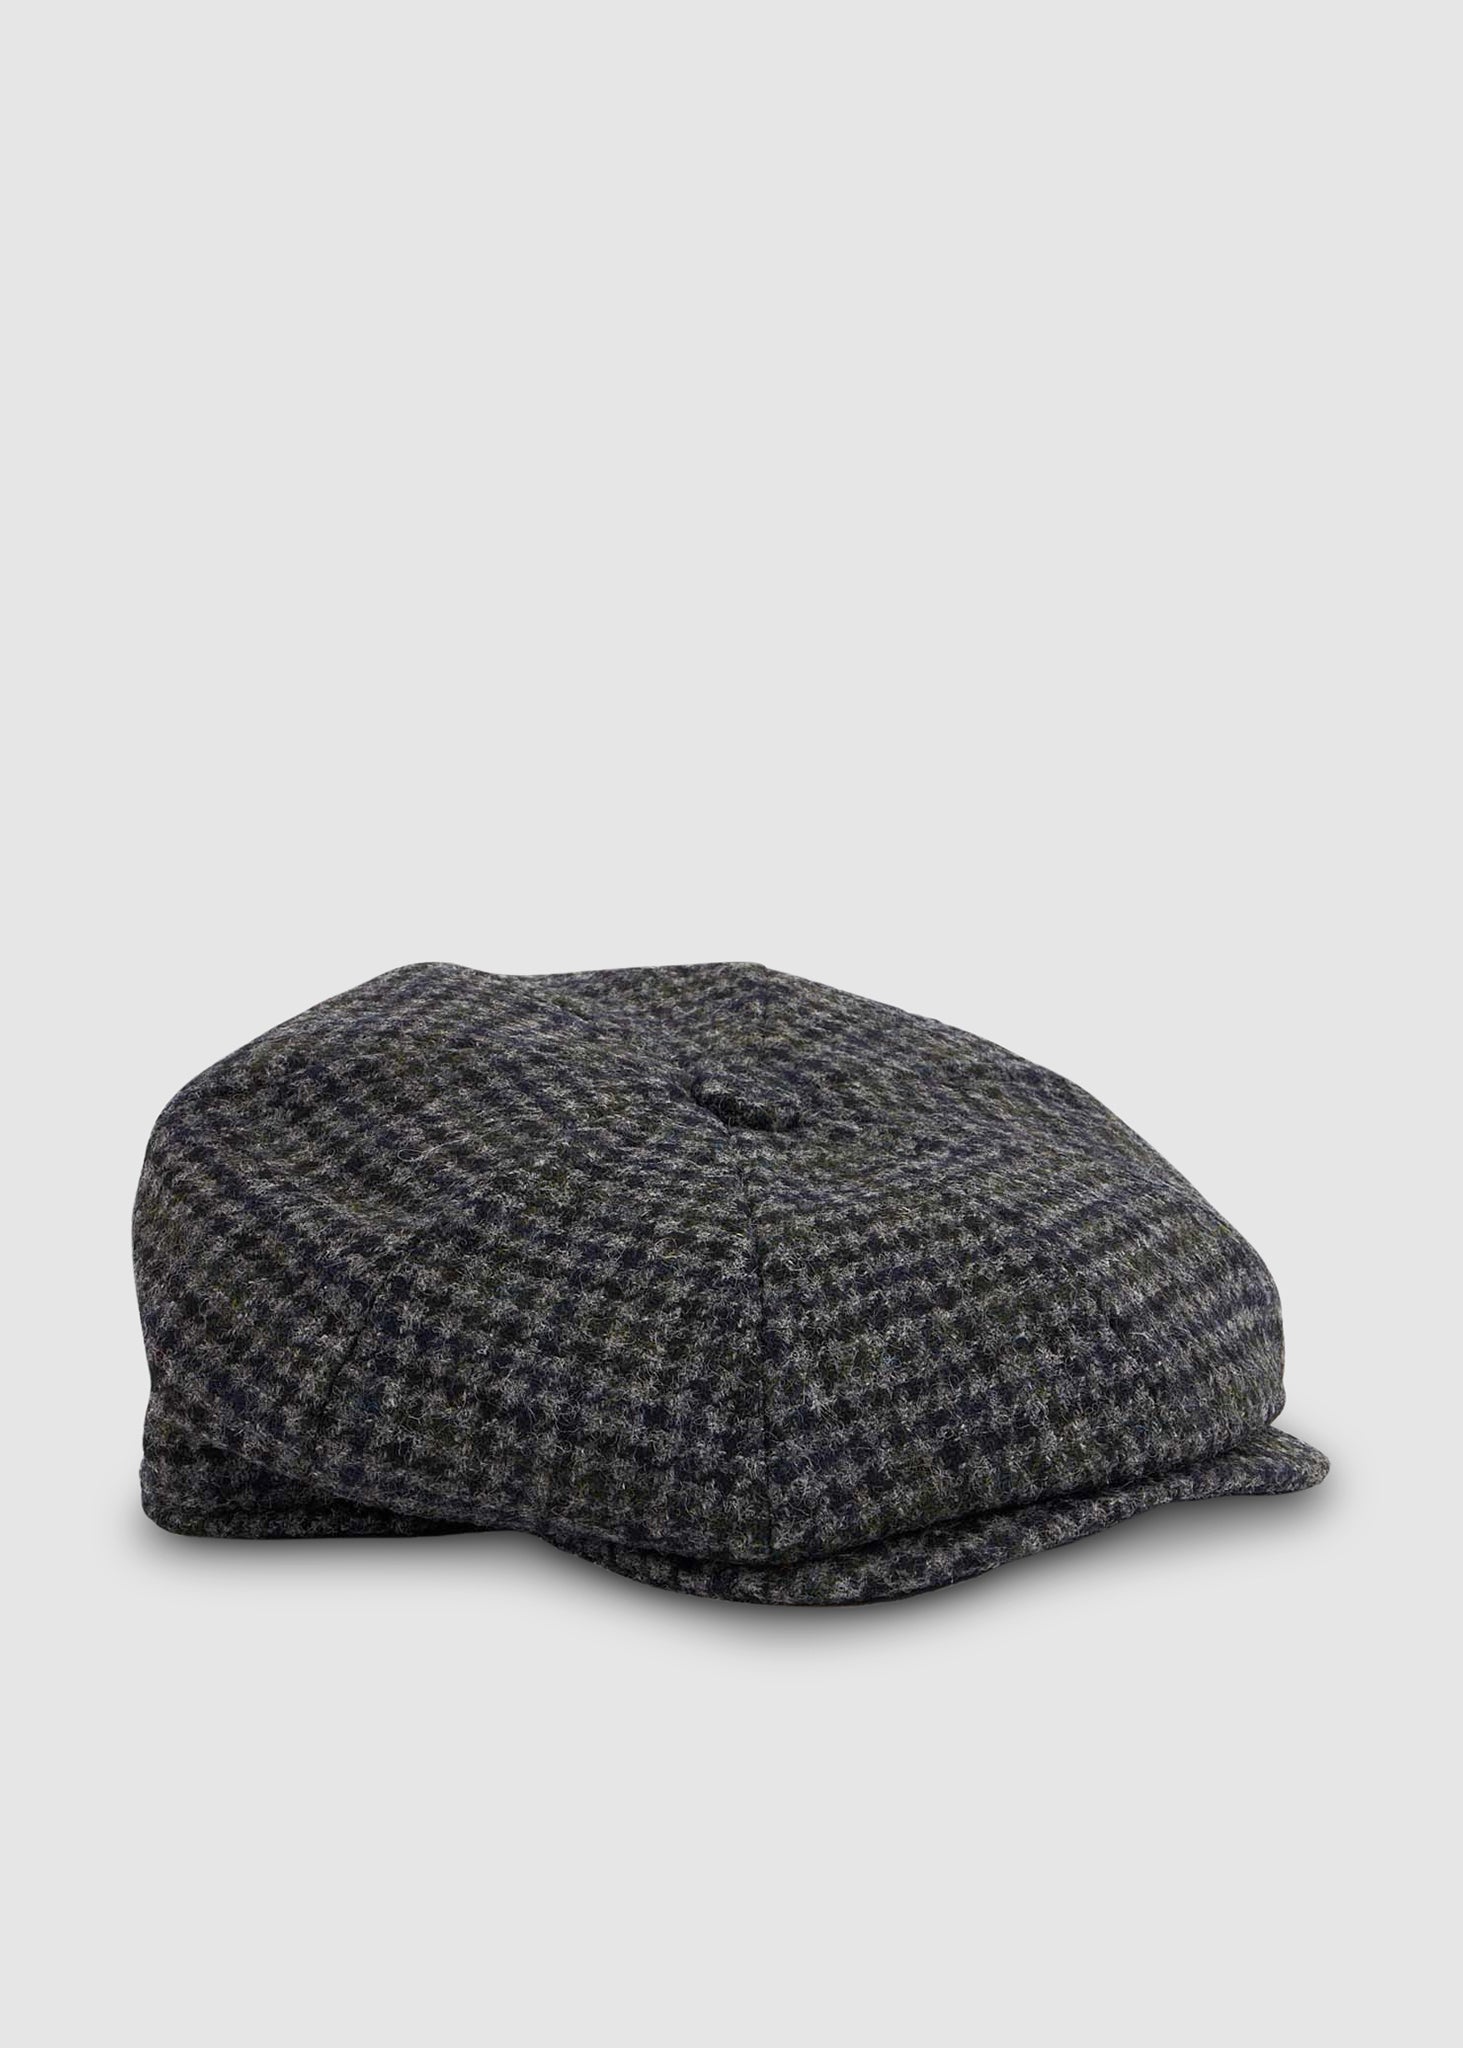 Image of Mens Oliver Sweeney Mazzucco Flat Cap In Grey Check